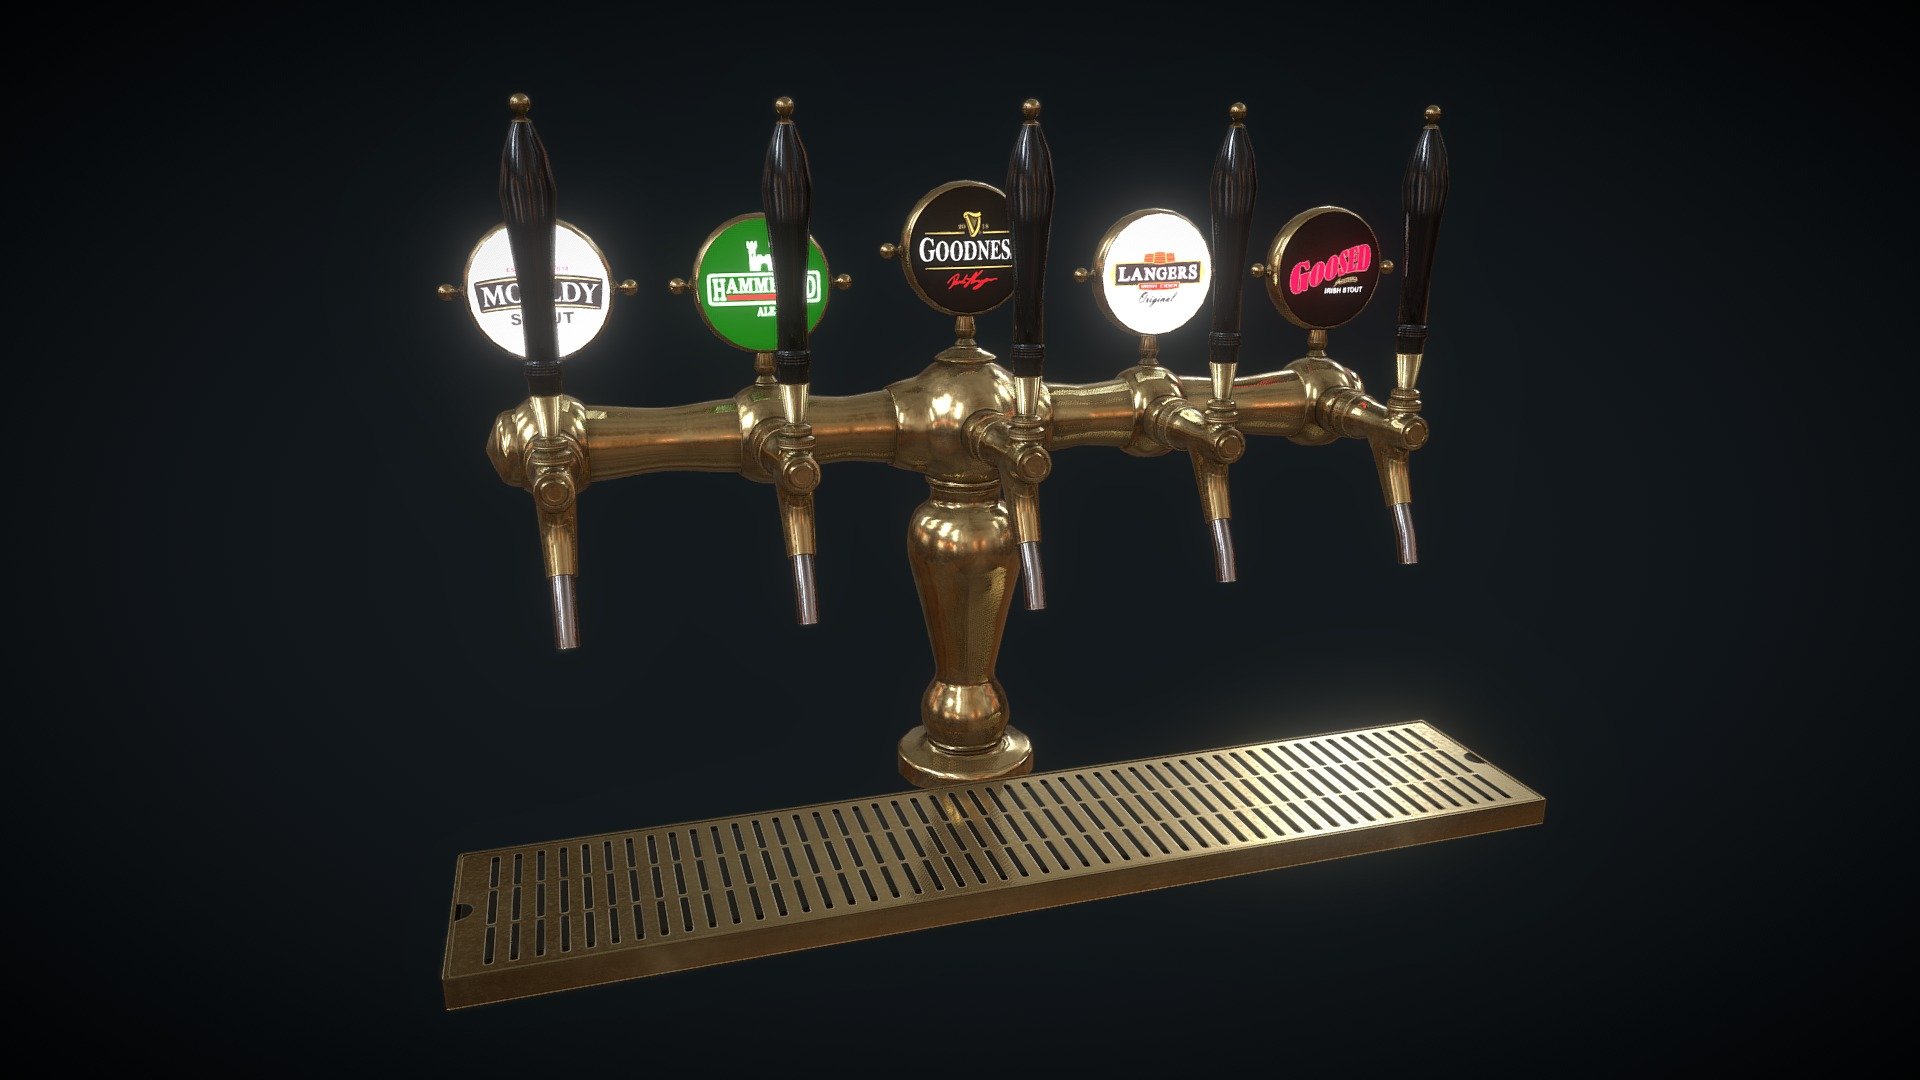 Beer taps dispenser, perfect for a bar or club enviornment. 

The beer dispenser has five taps with differint beer name logo's.  Each beer name logos has been named as Irish names for being drunk, just for fun.

PBR 4k textures - Beer Taps - Buy Royalty Free 3D model by Derek Flanagan (@derek_flanagan) 3d model